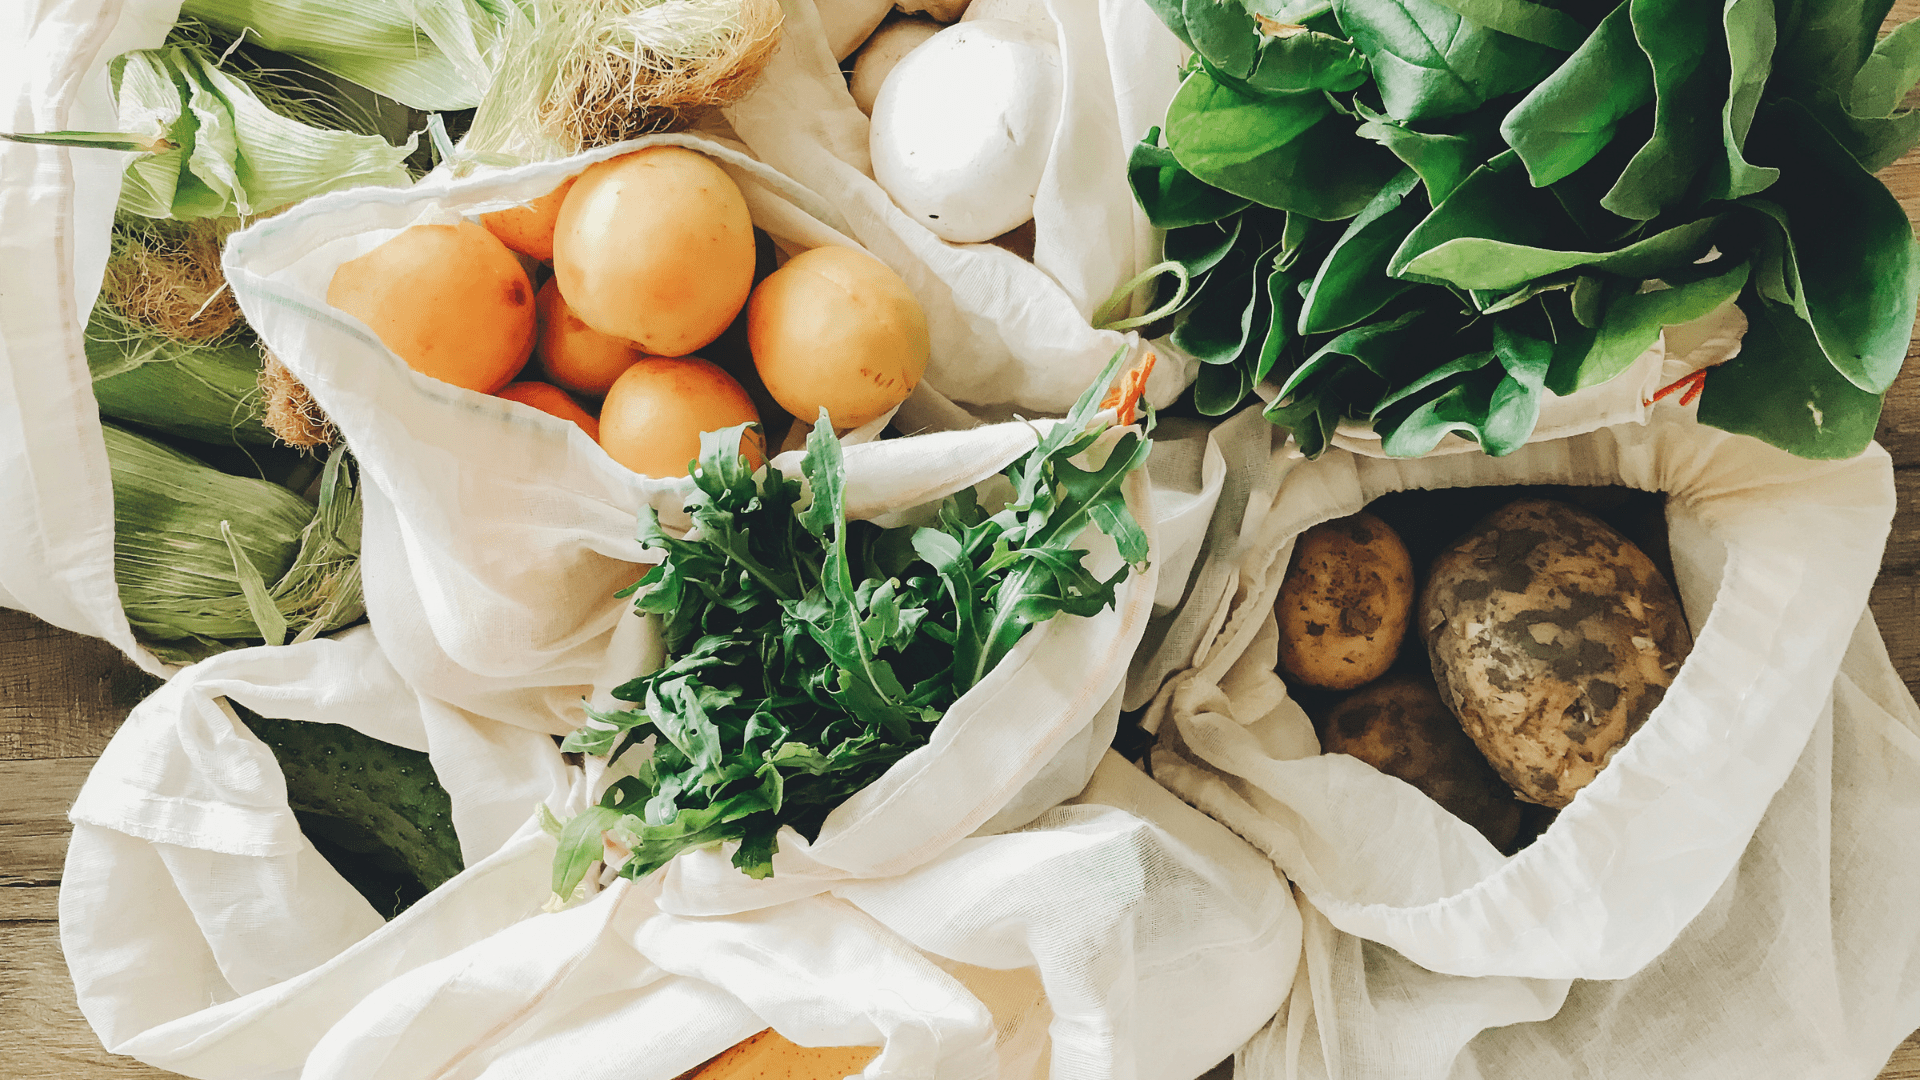 Grocery bags full of fruits and vegetables on a white kitchen counter.